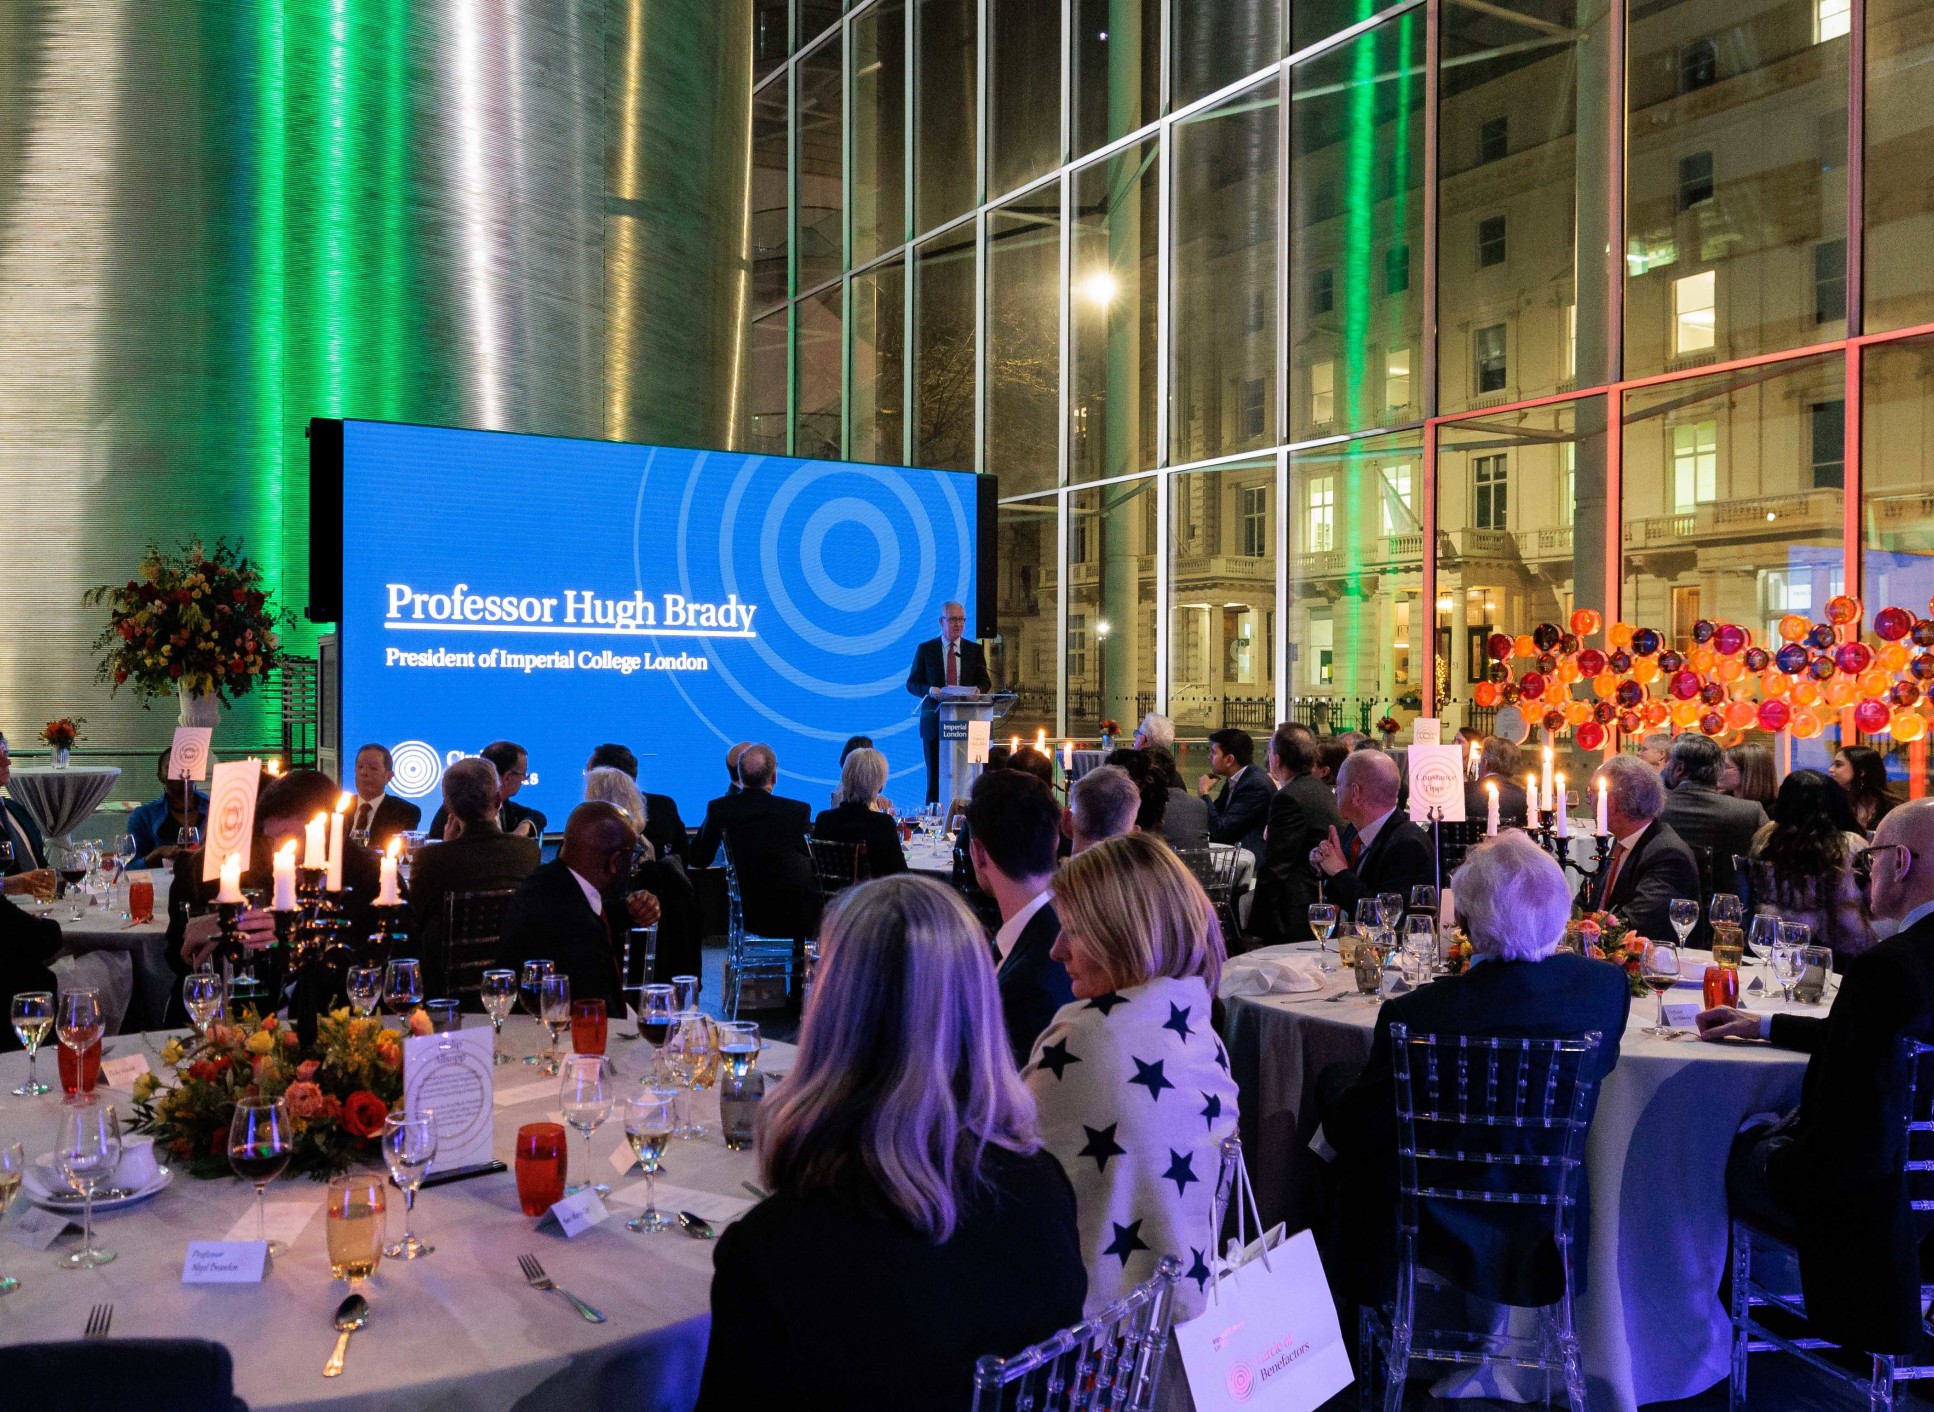 President Hugh Brady delivers a speech on a podium in front of the screen in College Main Entrance. To the right is the new donor installation and in the foreground are guests seated at tables